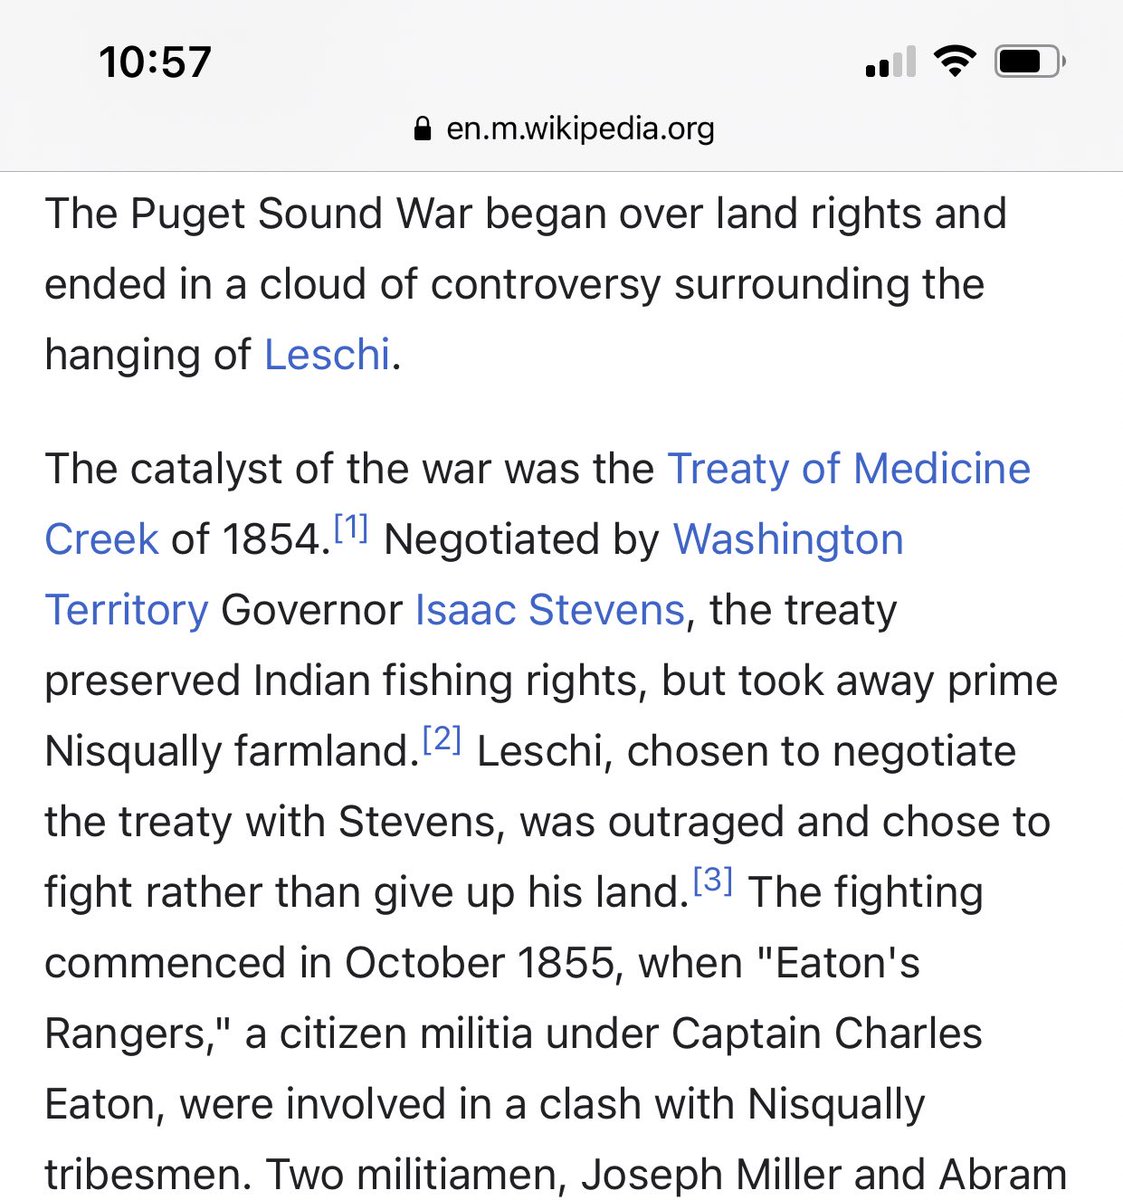 As is well-known, Harvey Scott decided to invest his time out west by volunteering for a local militia for the express task of killing Native Americans in order to take their land by force. (Looks like I didn’t finish my homework here)